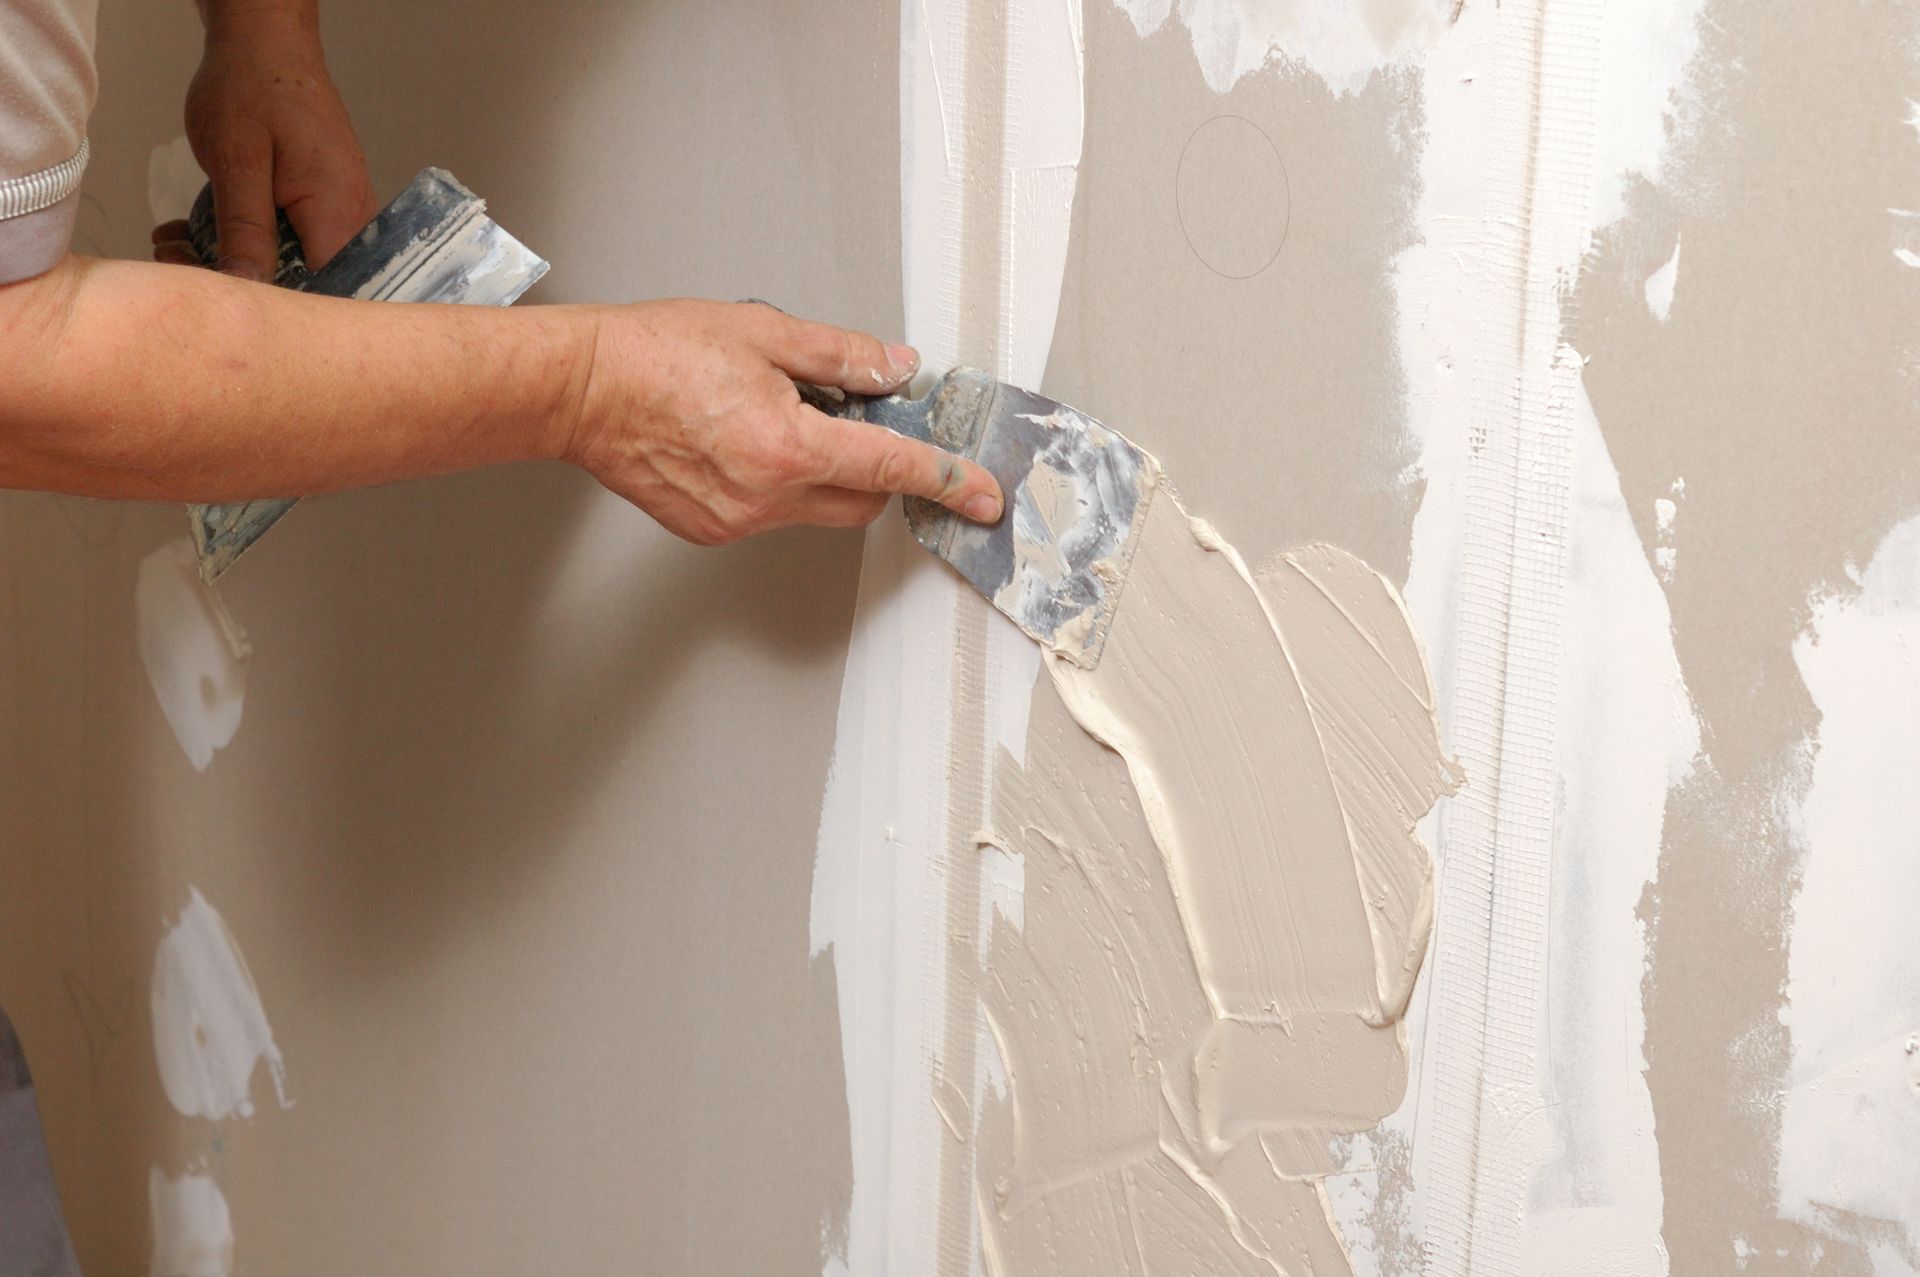 An experienced hand smoothing out freshly applied joint compound on a damaged section of drywall, preparing it for repair.